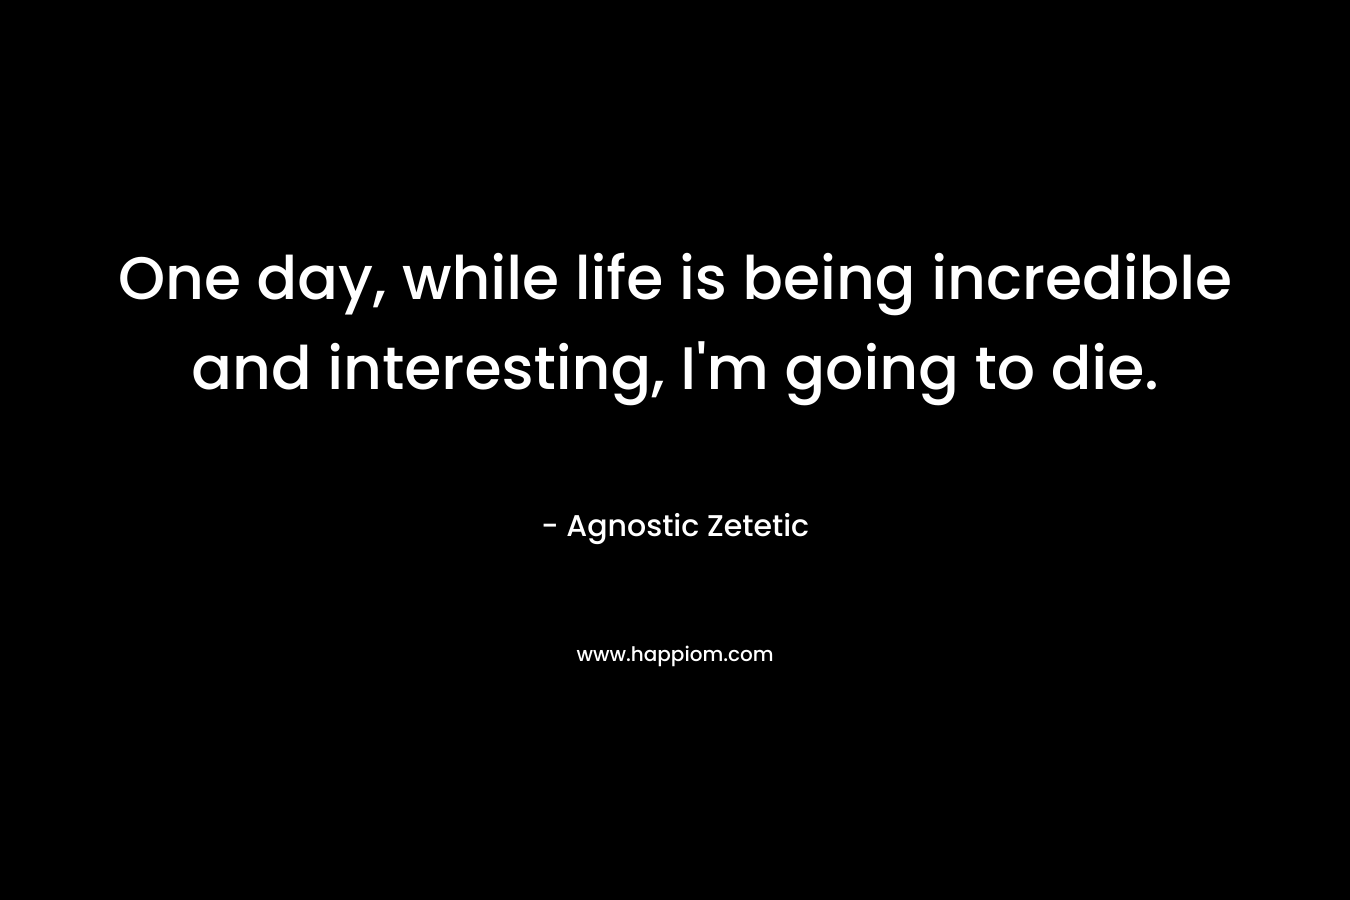 One day, while life is being incredible and interesting, I’m going to die. – Agnostic Zetetic